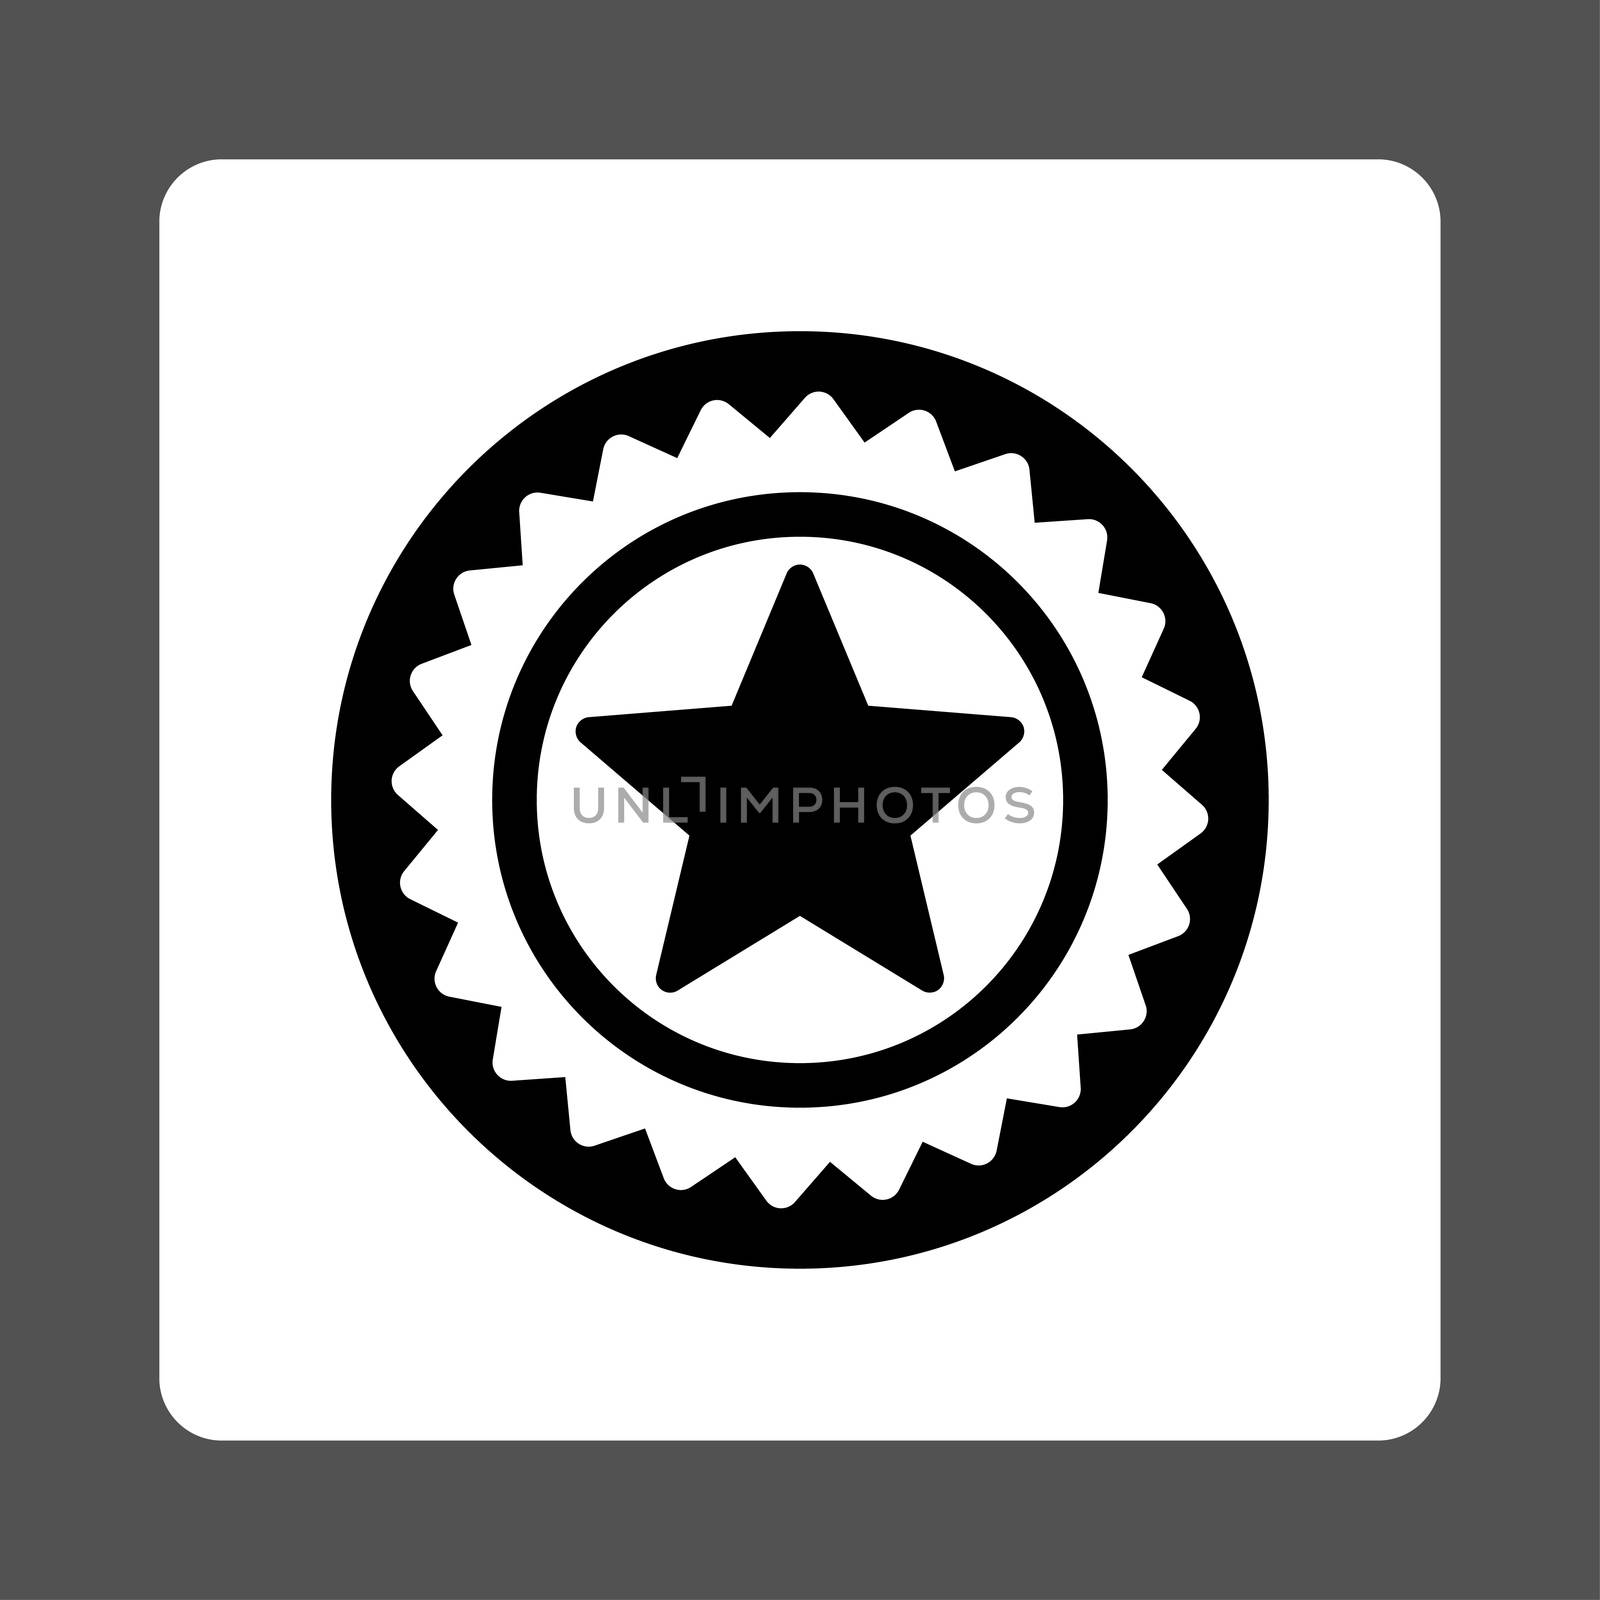 Medal seal icon from Award Buttons OverColor Set. Icon style is black and white colors, flat rounded square button, gray background.